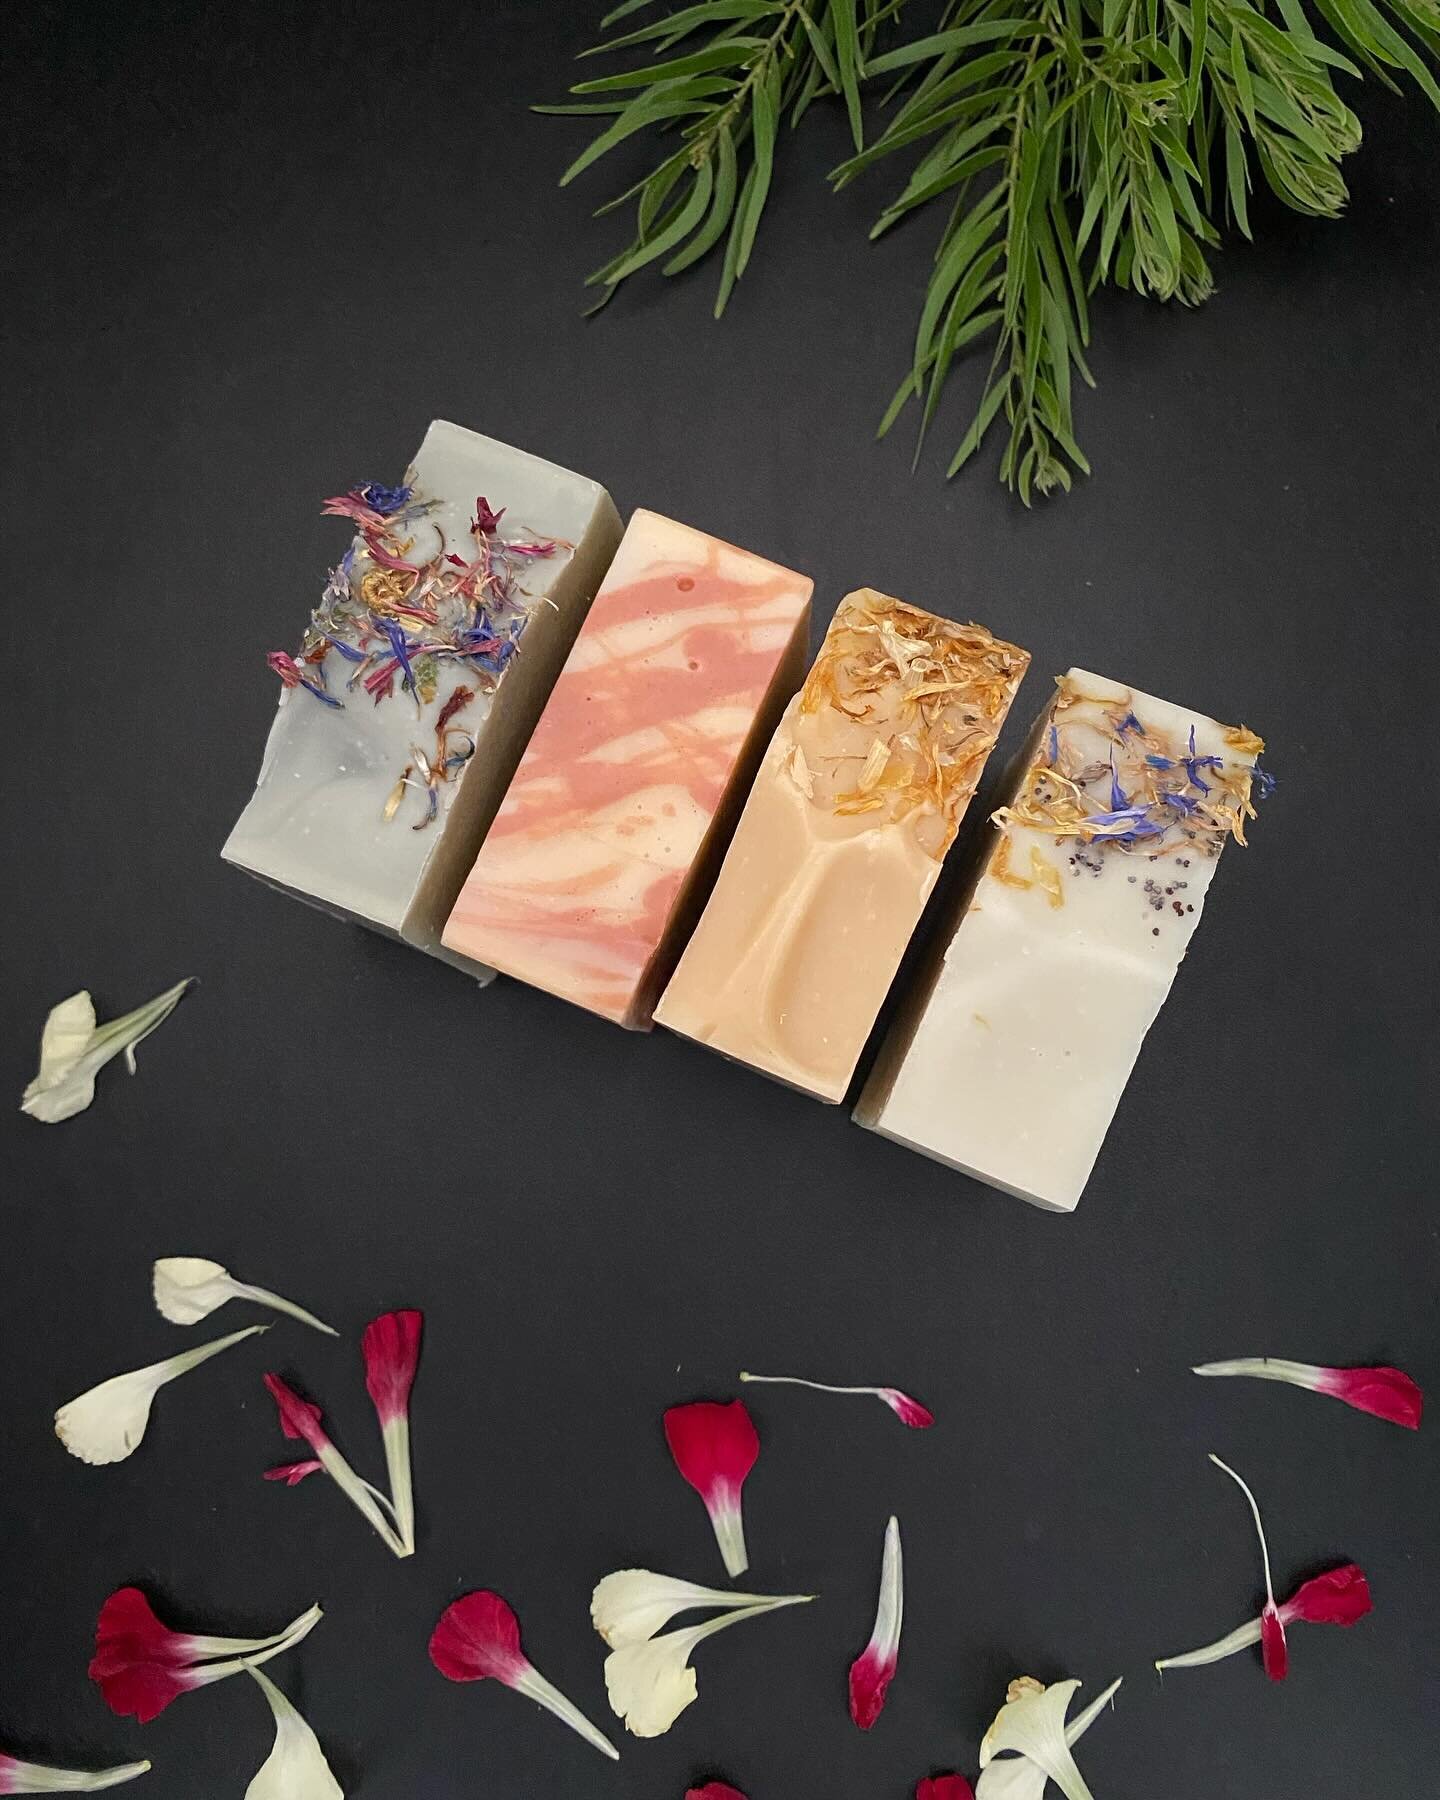 Gift Box - Citrus Collection

Great gift for friends, family or a special occasion.

Four artisan soaps made with Australian extra virgin olive oil and other luxury butters + oils to make a gentle moisturising soap bar. Each soap has its own distinct